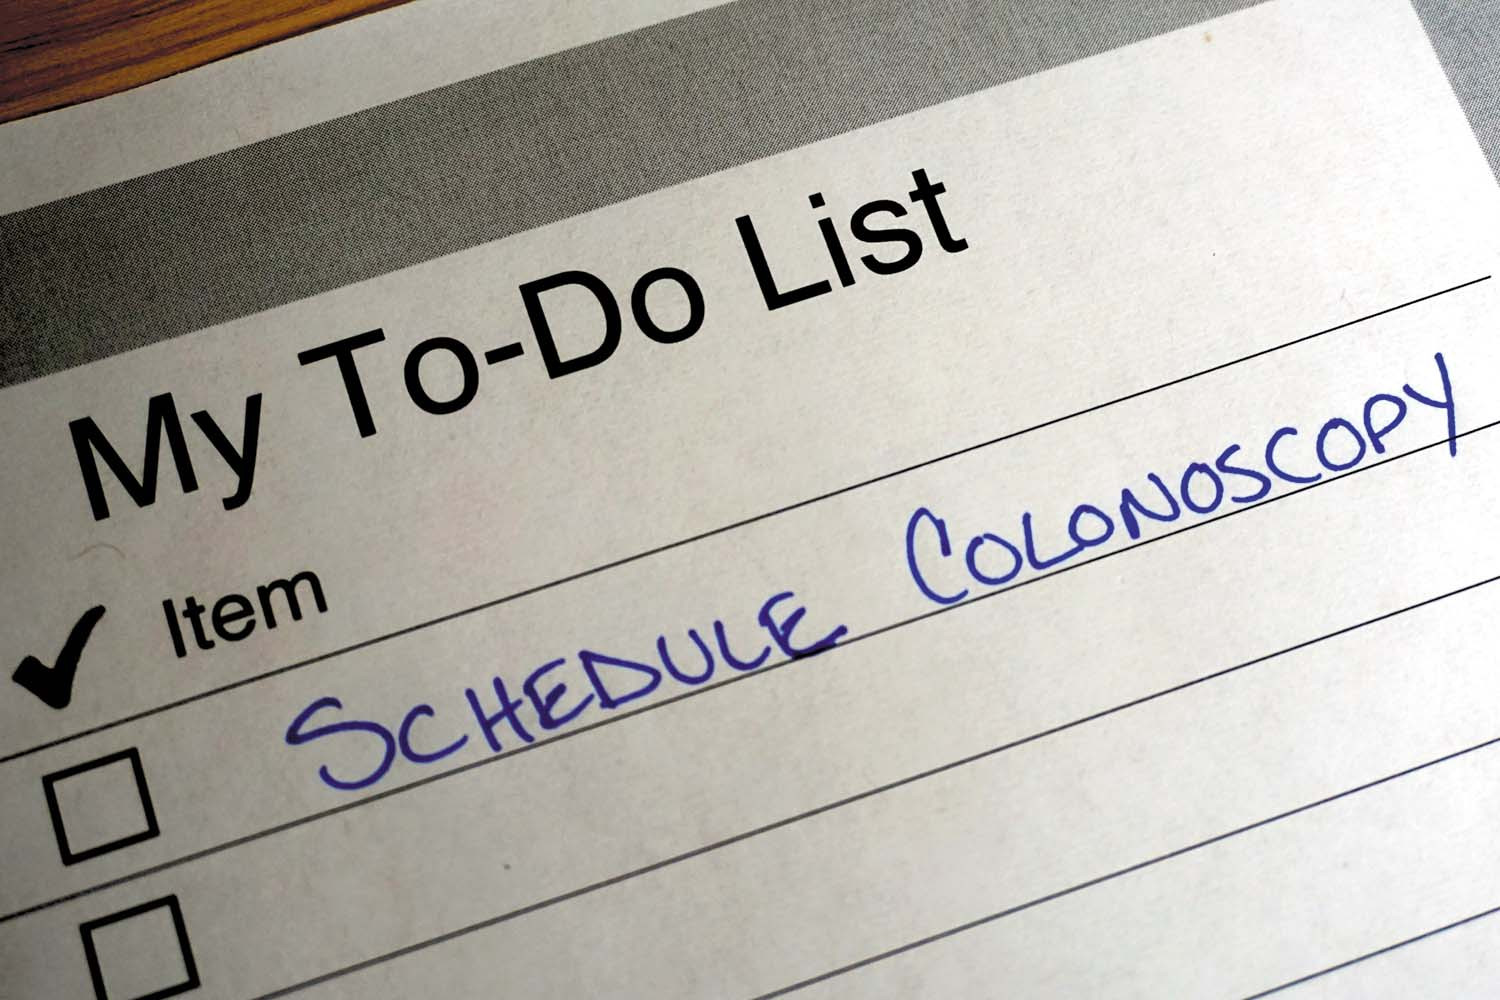 photo of a to-do list with schedule colonoscopy written on it